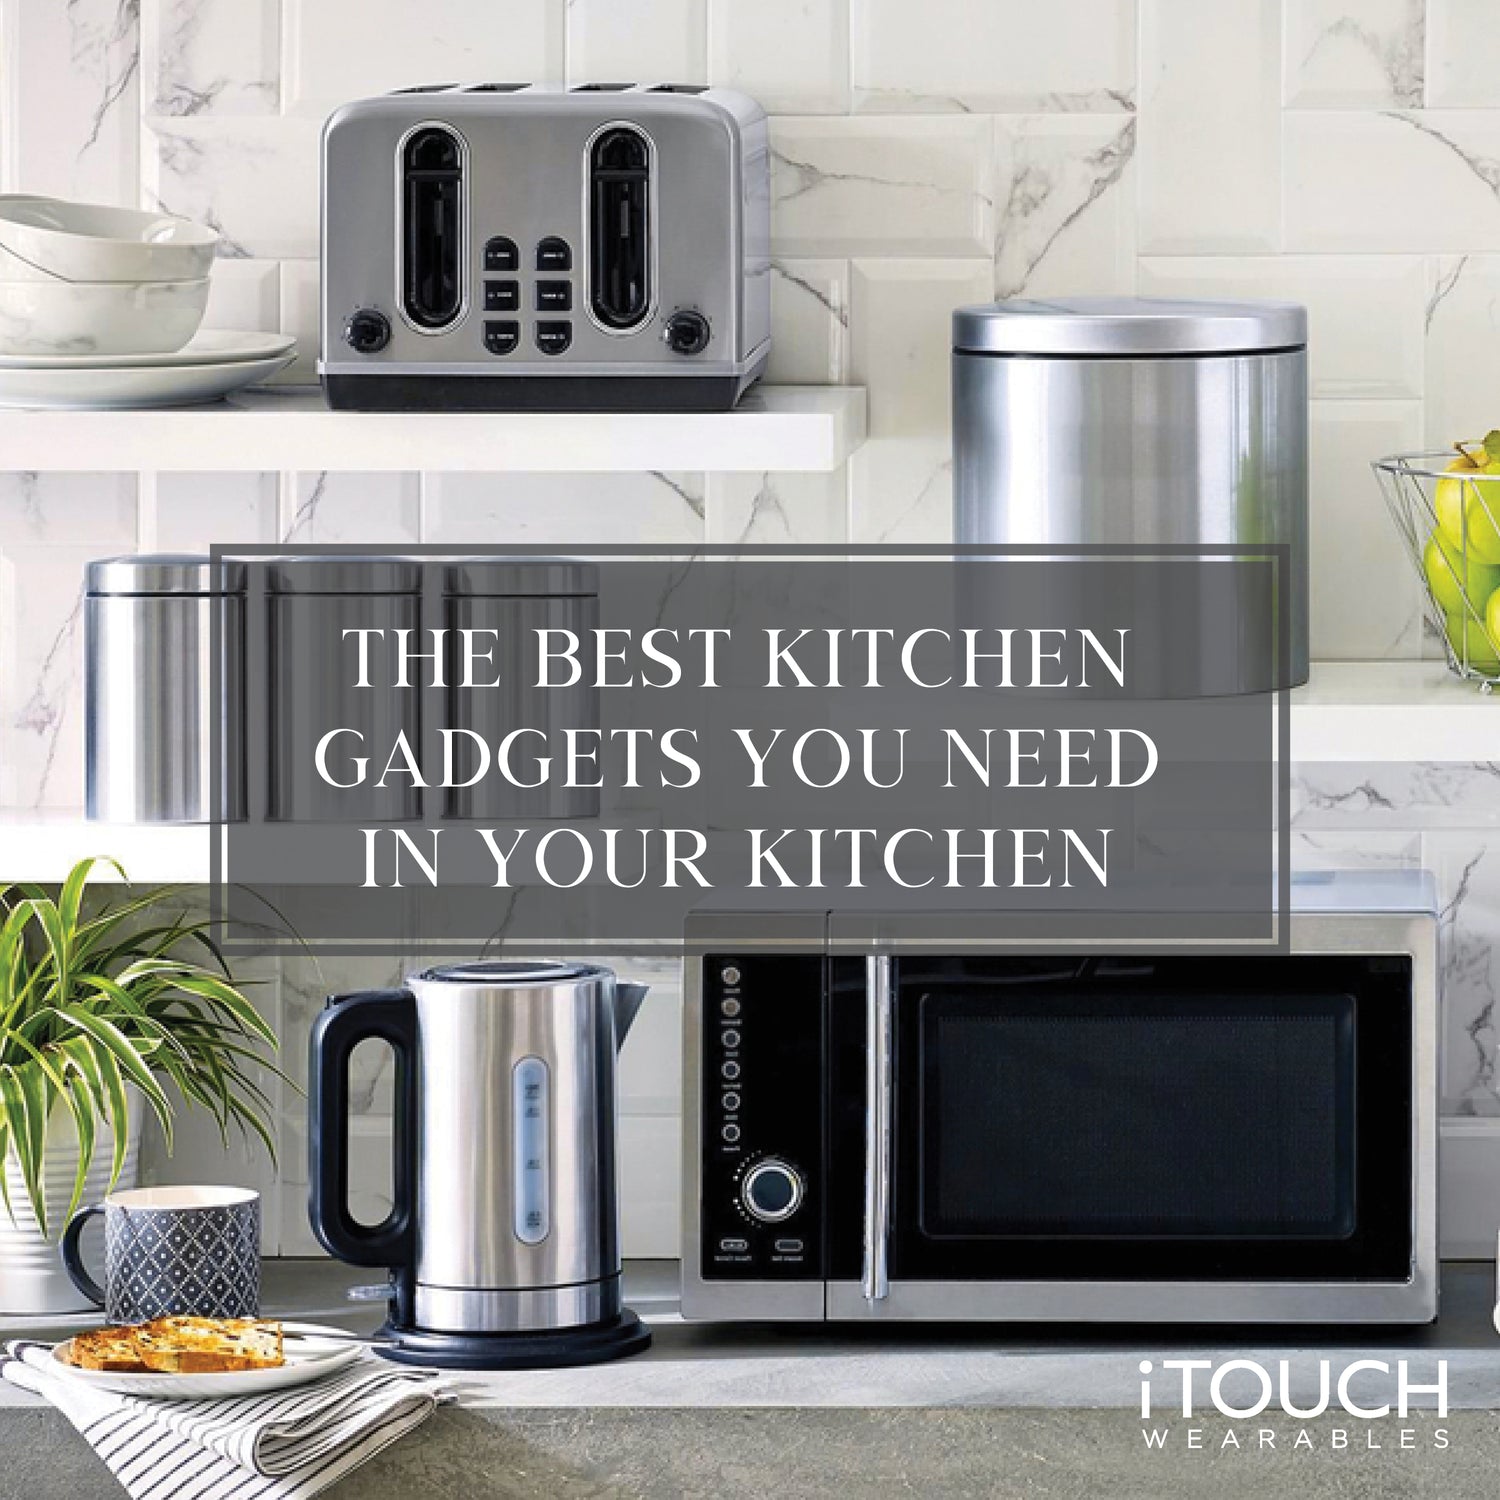 The Best Kitchen Gadgets You Need In Your Kitchen - iTOUCH Wearables